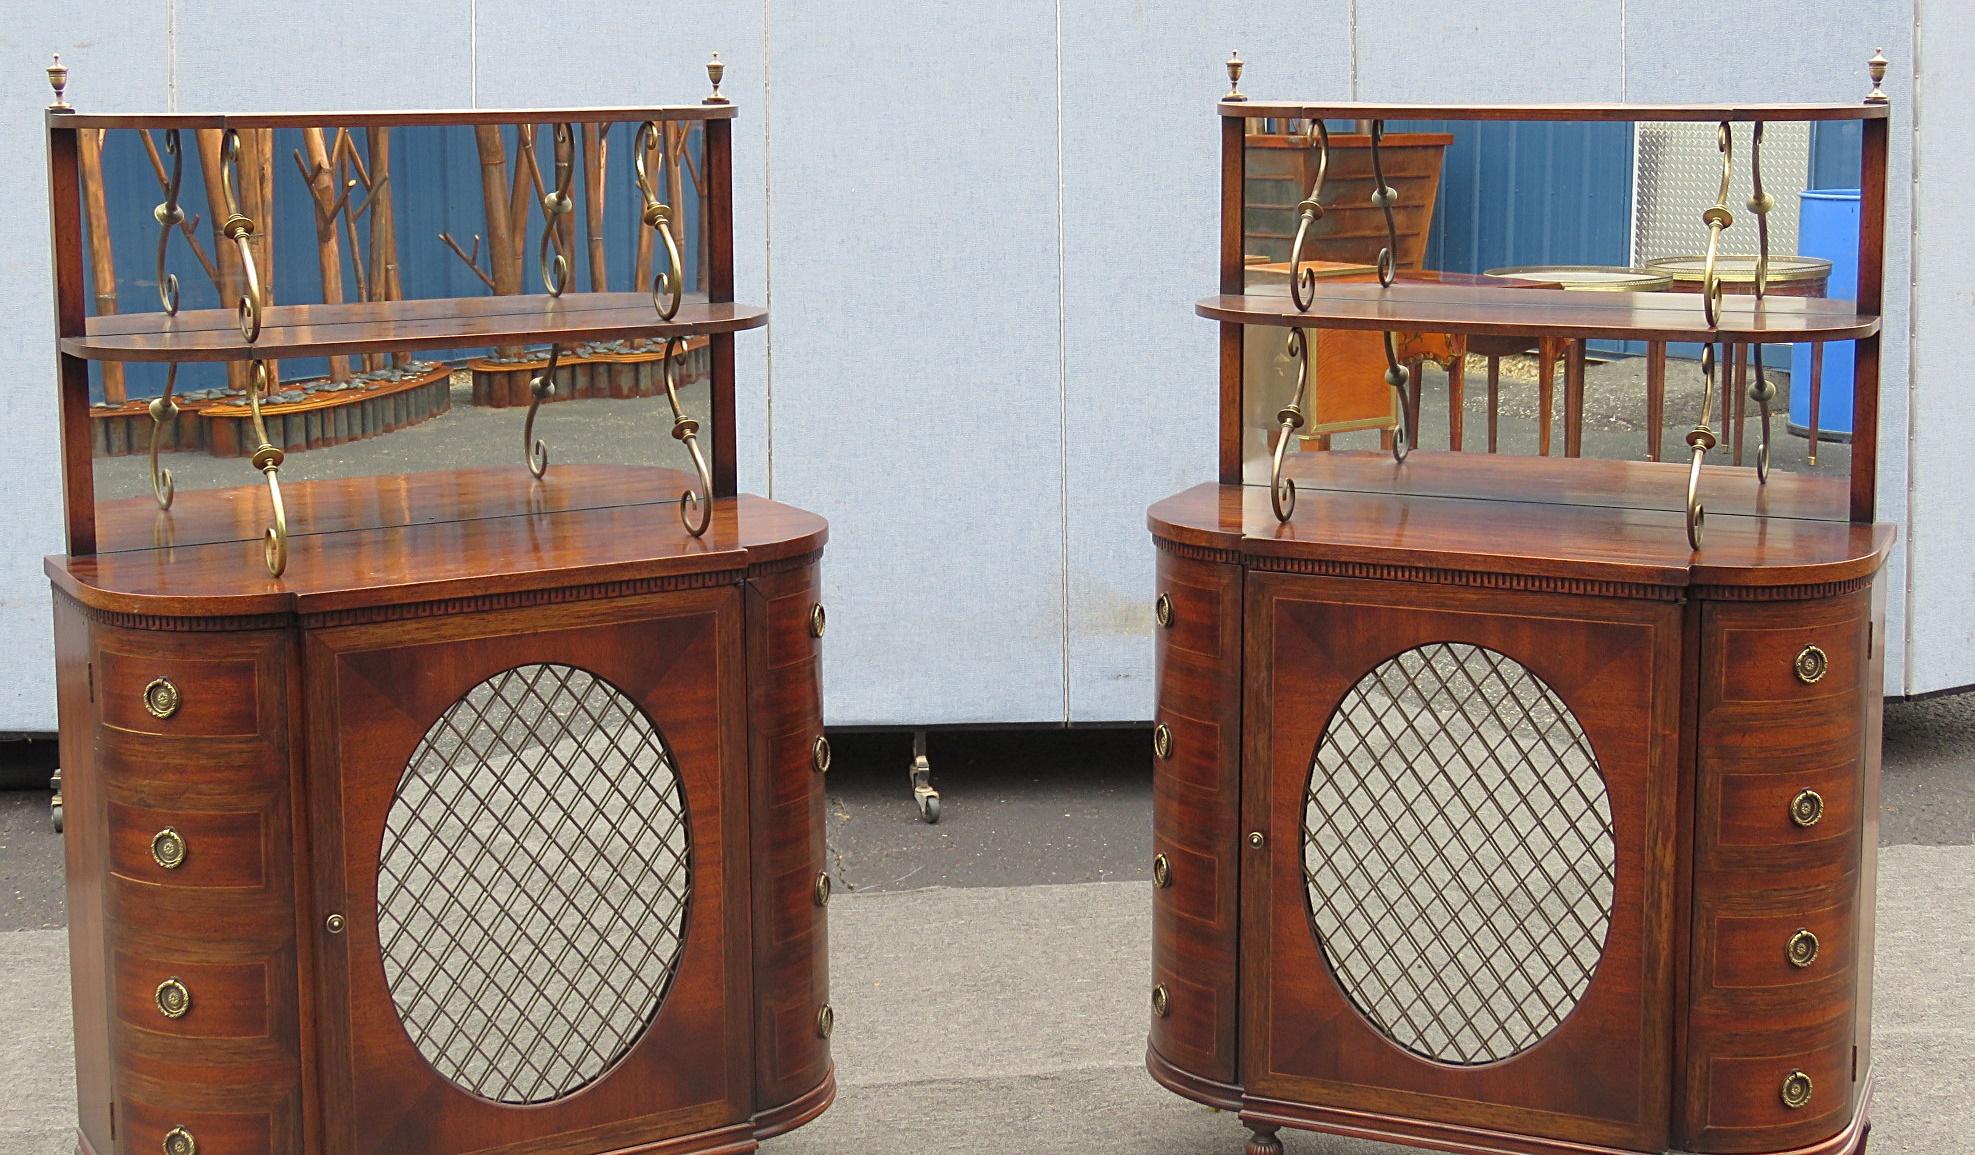 Pair of Regency style servers with two shelves on top with mirrored backs and three doors each containing two shelves.